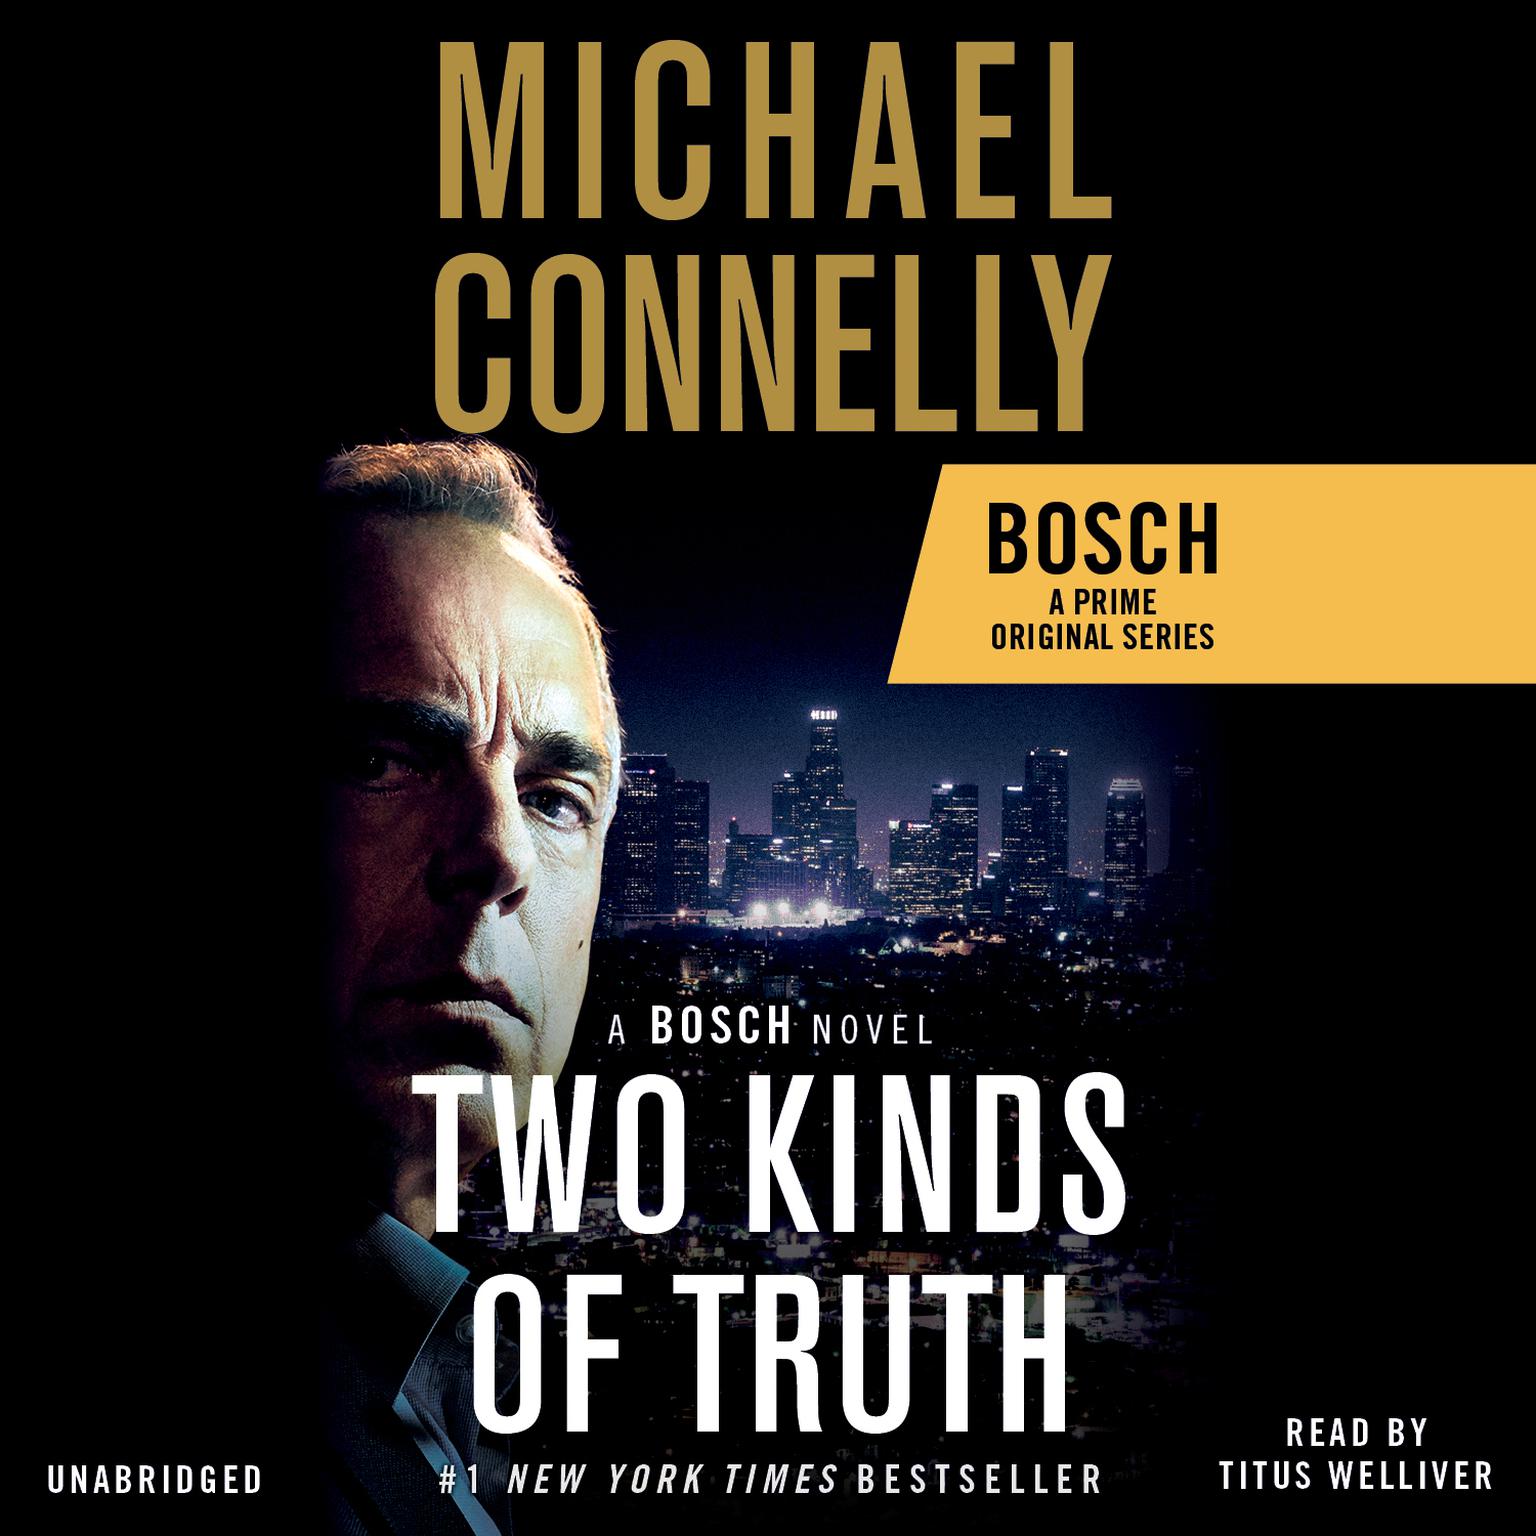 Two Kinds of Truth Audiobook, by Michael Connelly